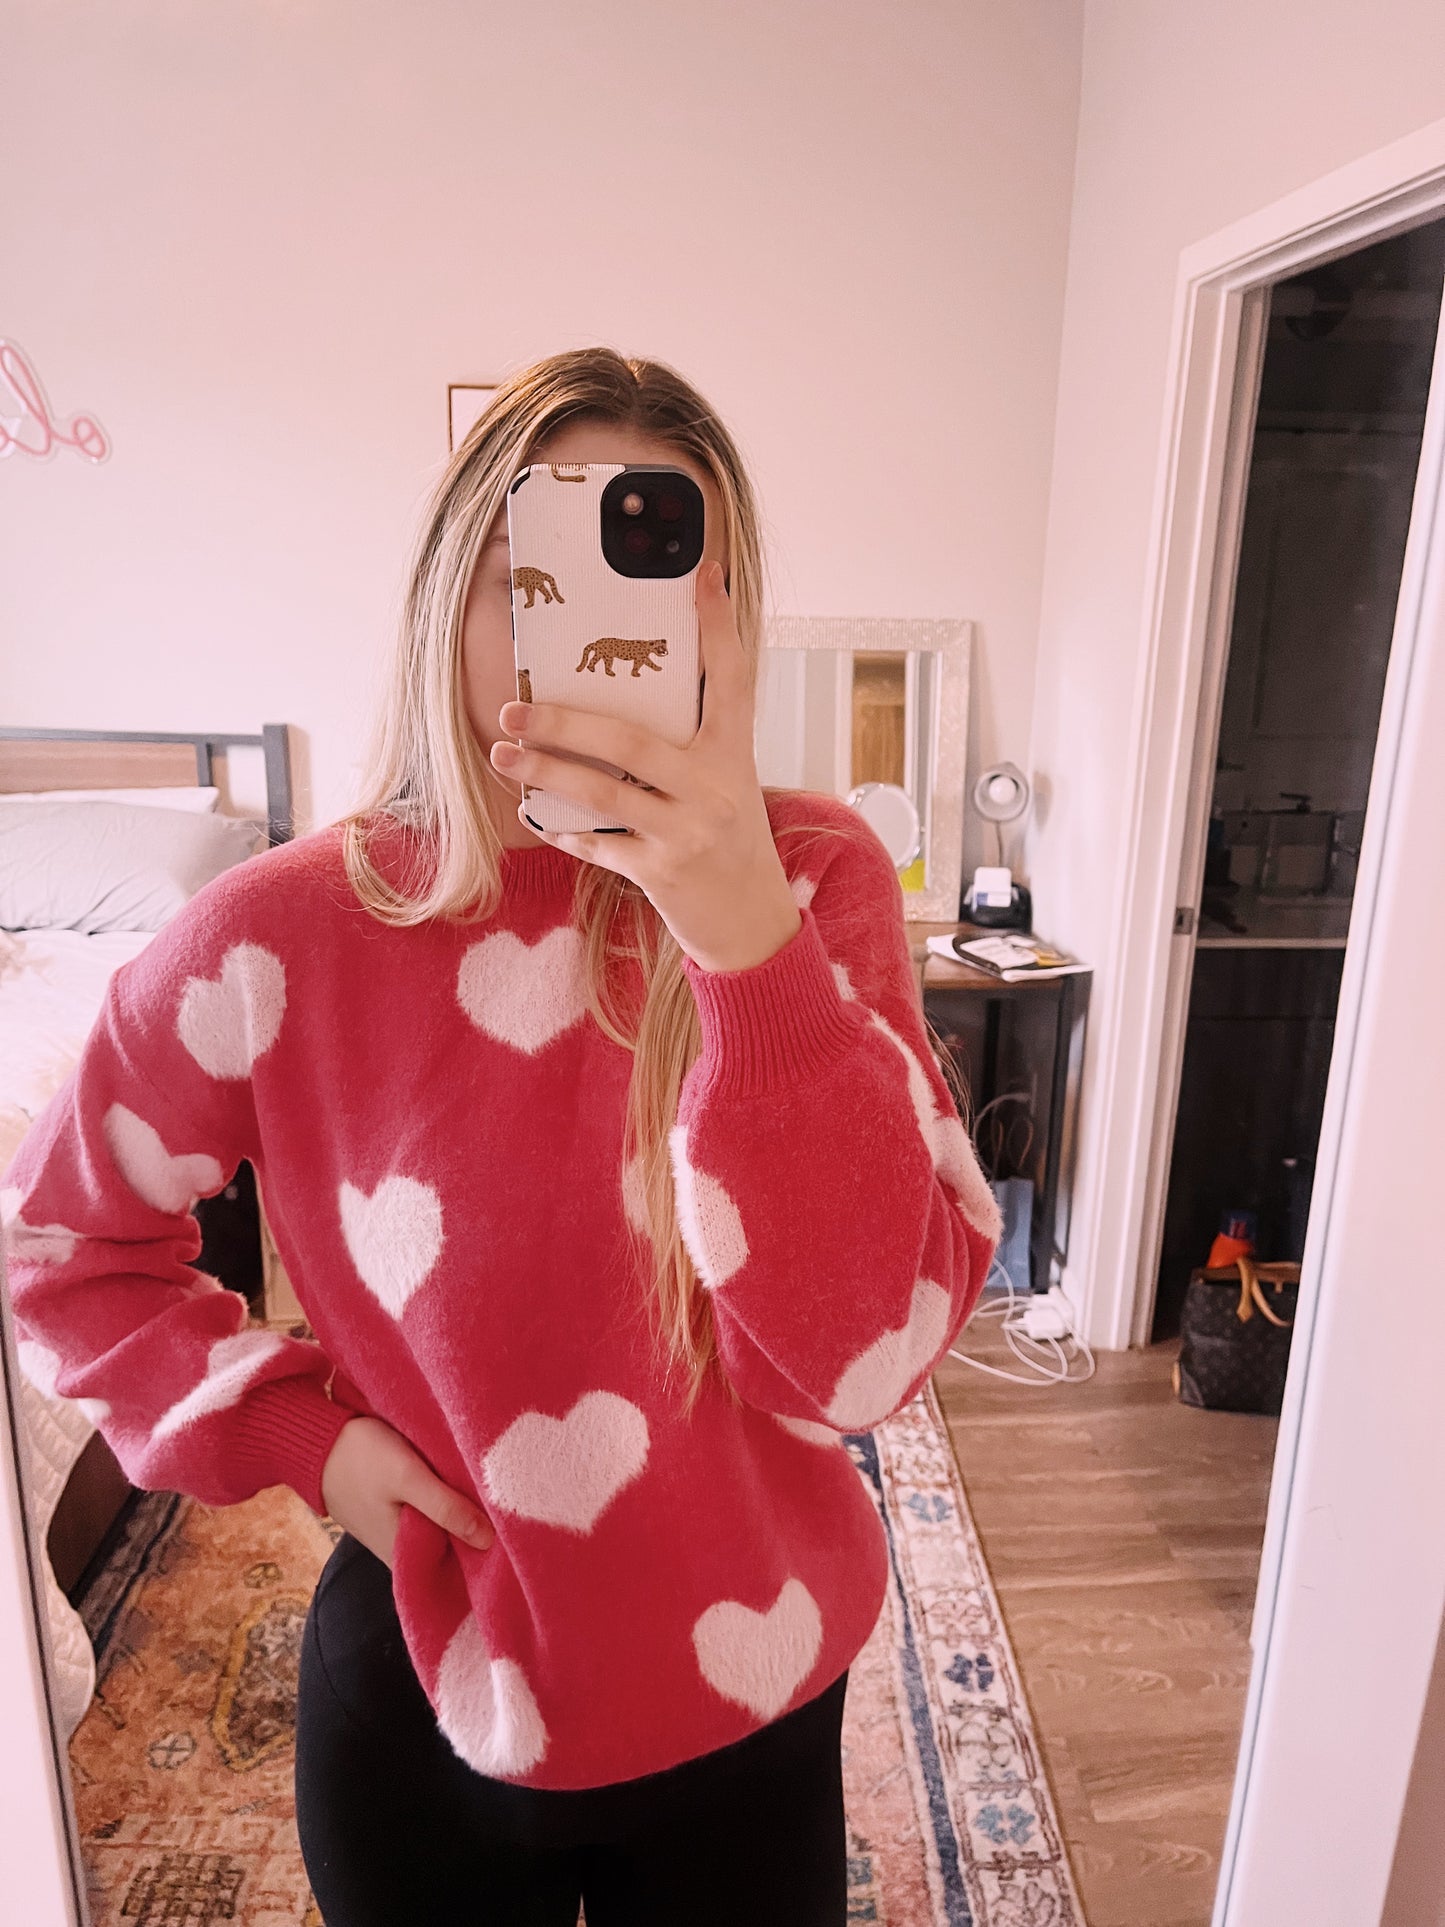 Pink Hearts Sweater